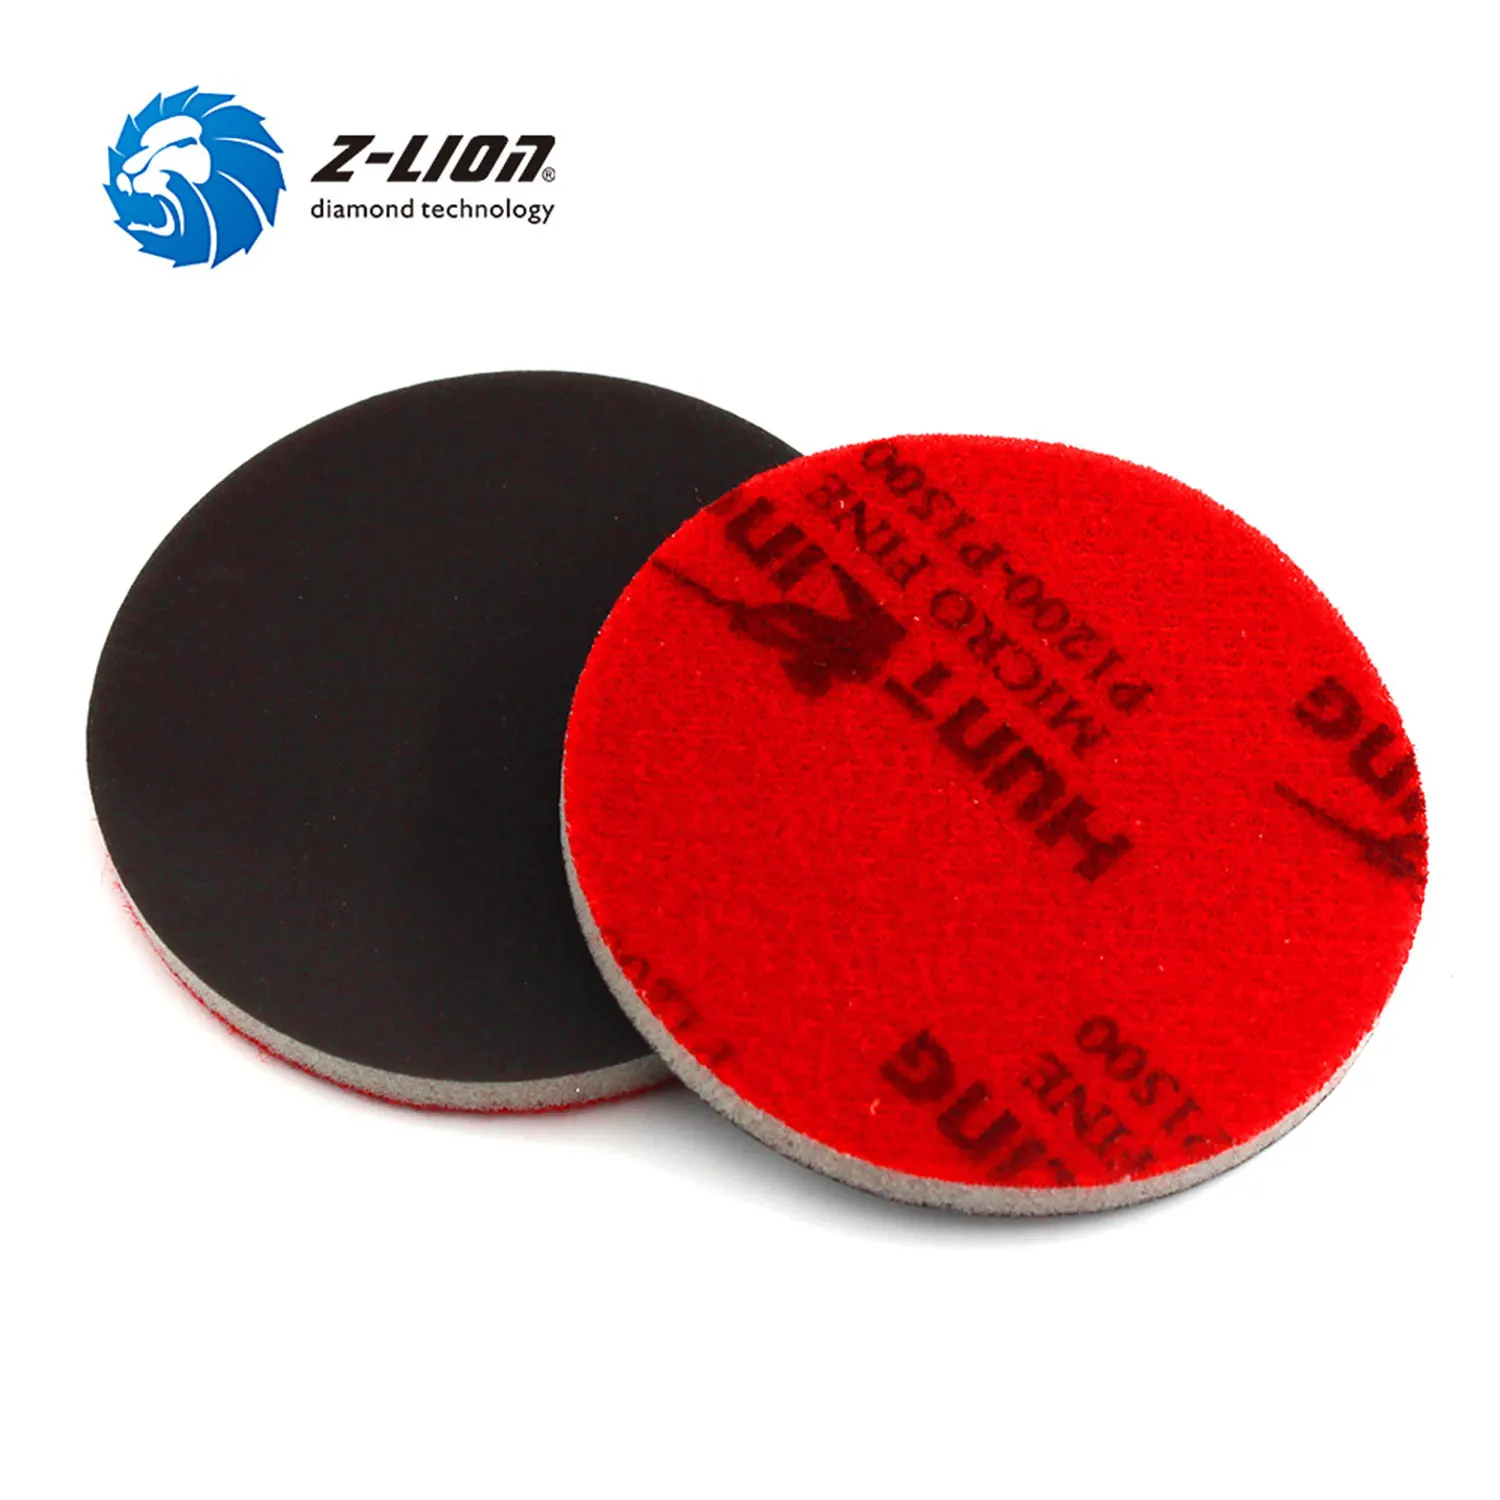 

Z-LION 2 pcs 3 Inch 75mm Round Polishing Sponge Pad, paper grinding toolSuitable for polishing of car repair paint